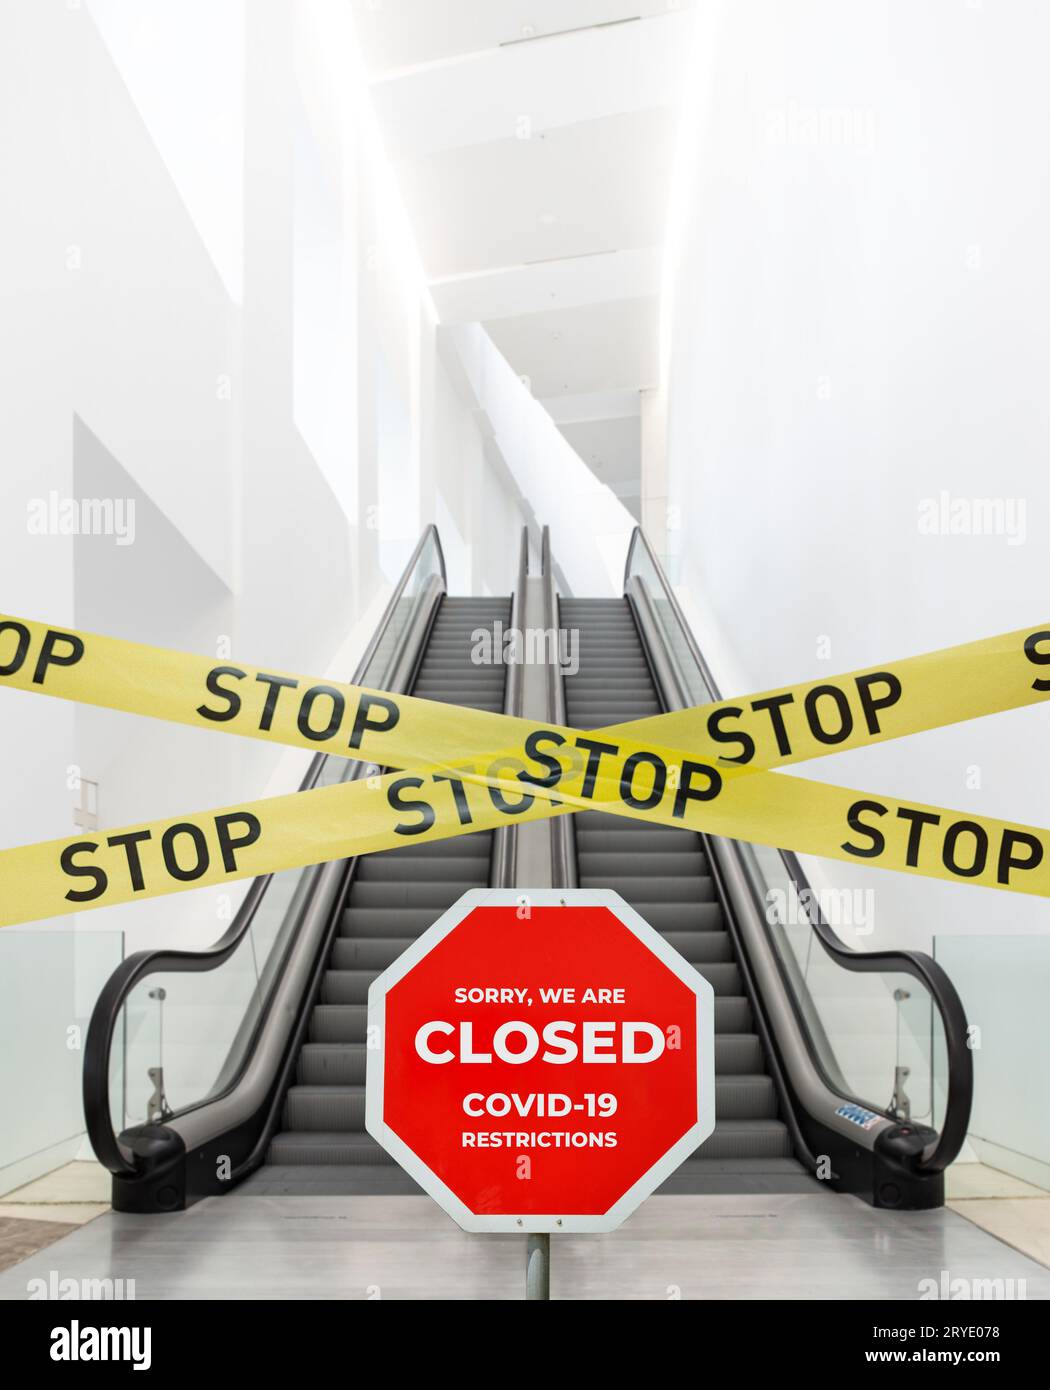 Scene of Public indoor with barrier tape and stop sign Stock Photo